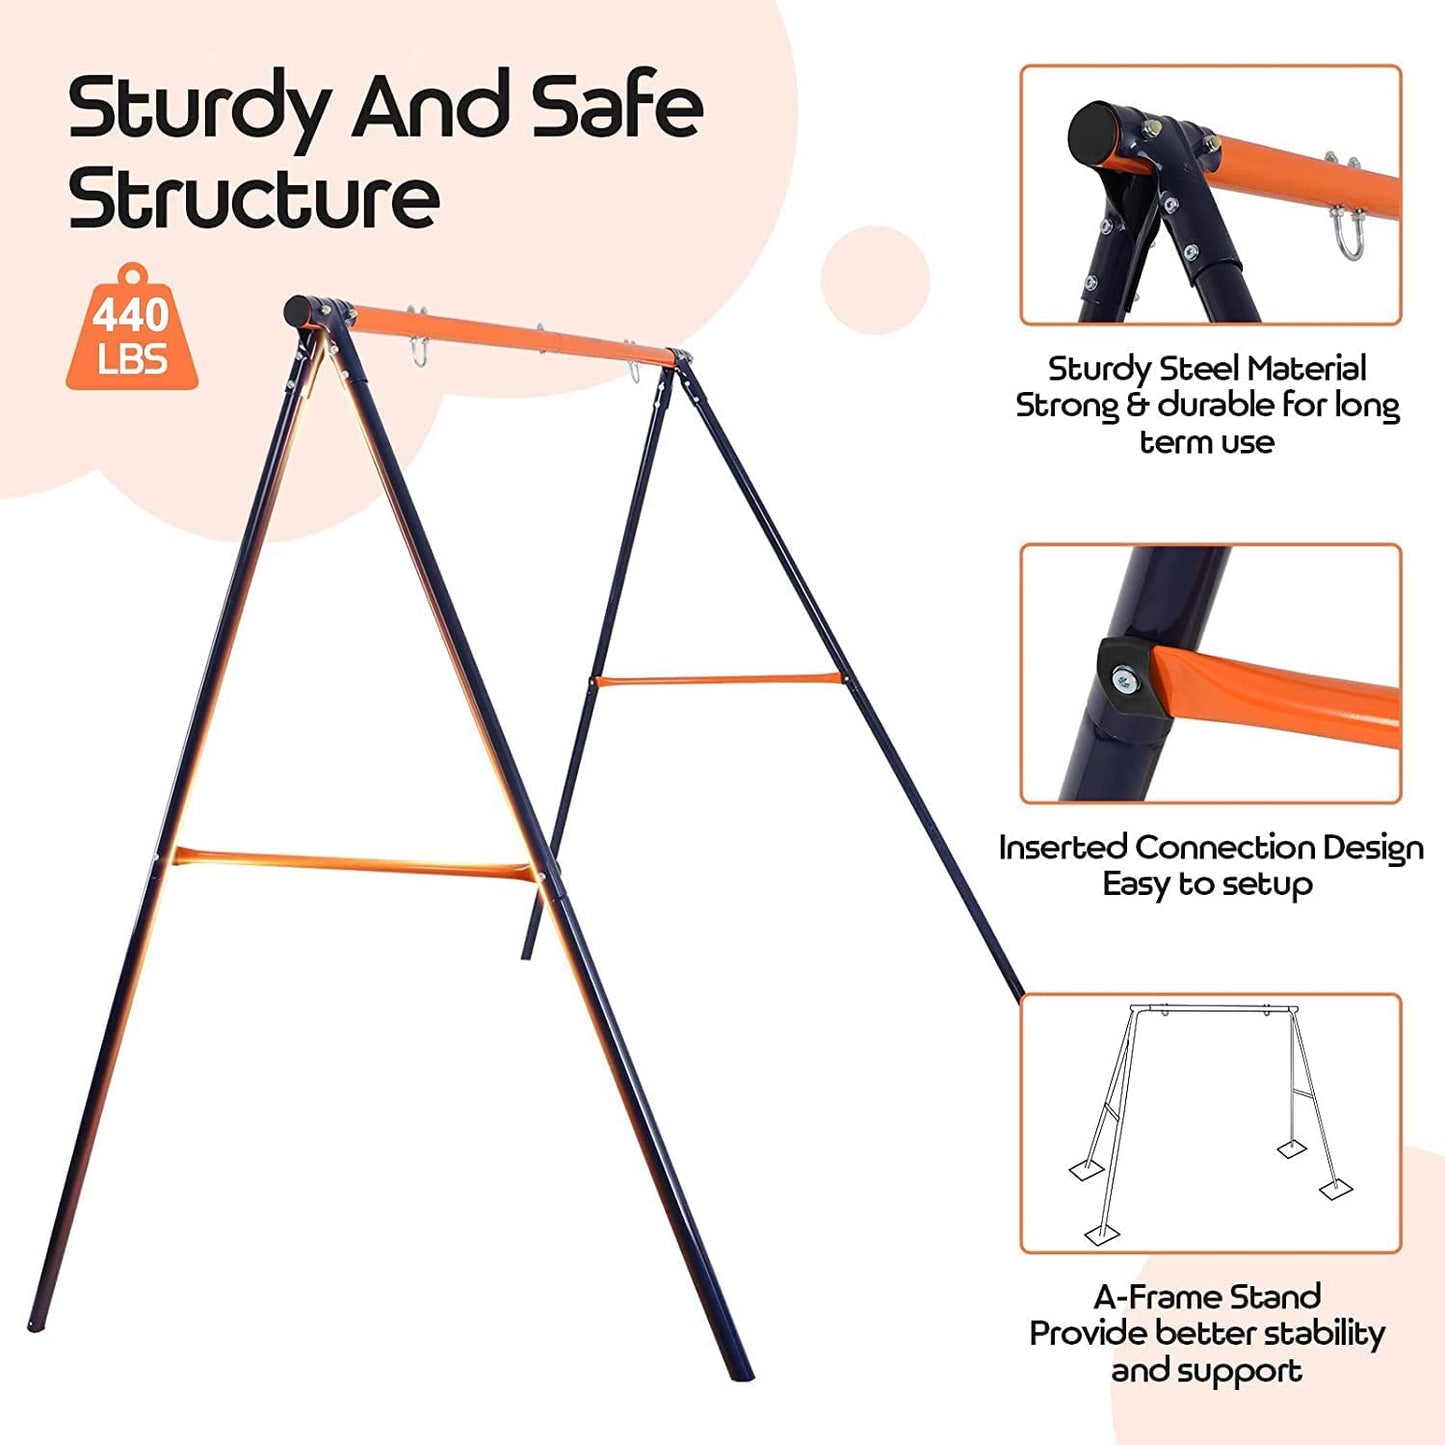 Swing Stand Frame Heavy Duty A-Frame Swing Set for Kids Adults Outdoor Backyard Play Fun Weight Capacity 440lbs